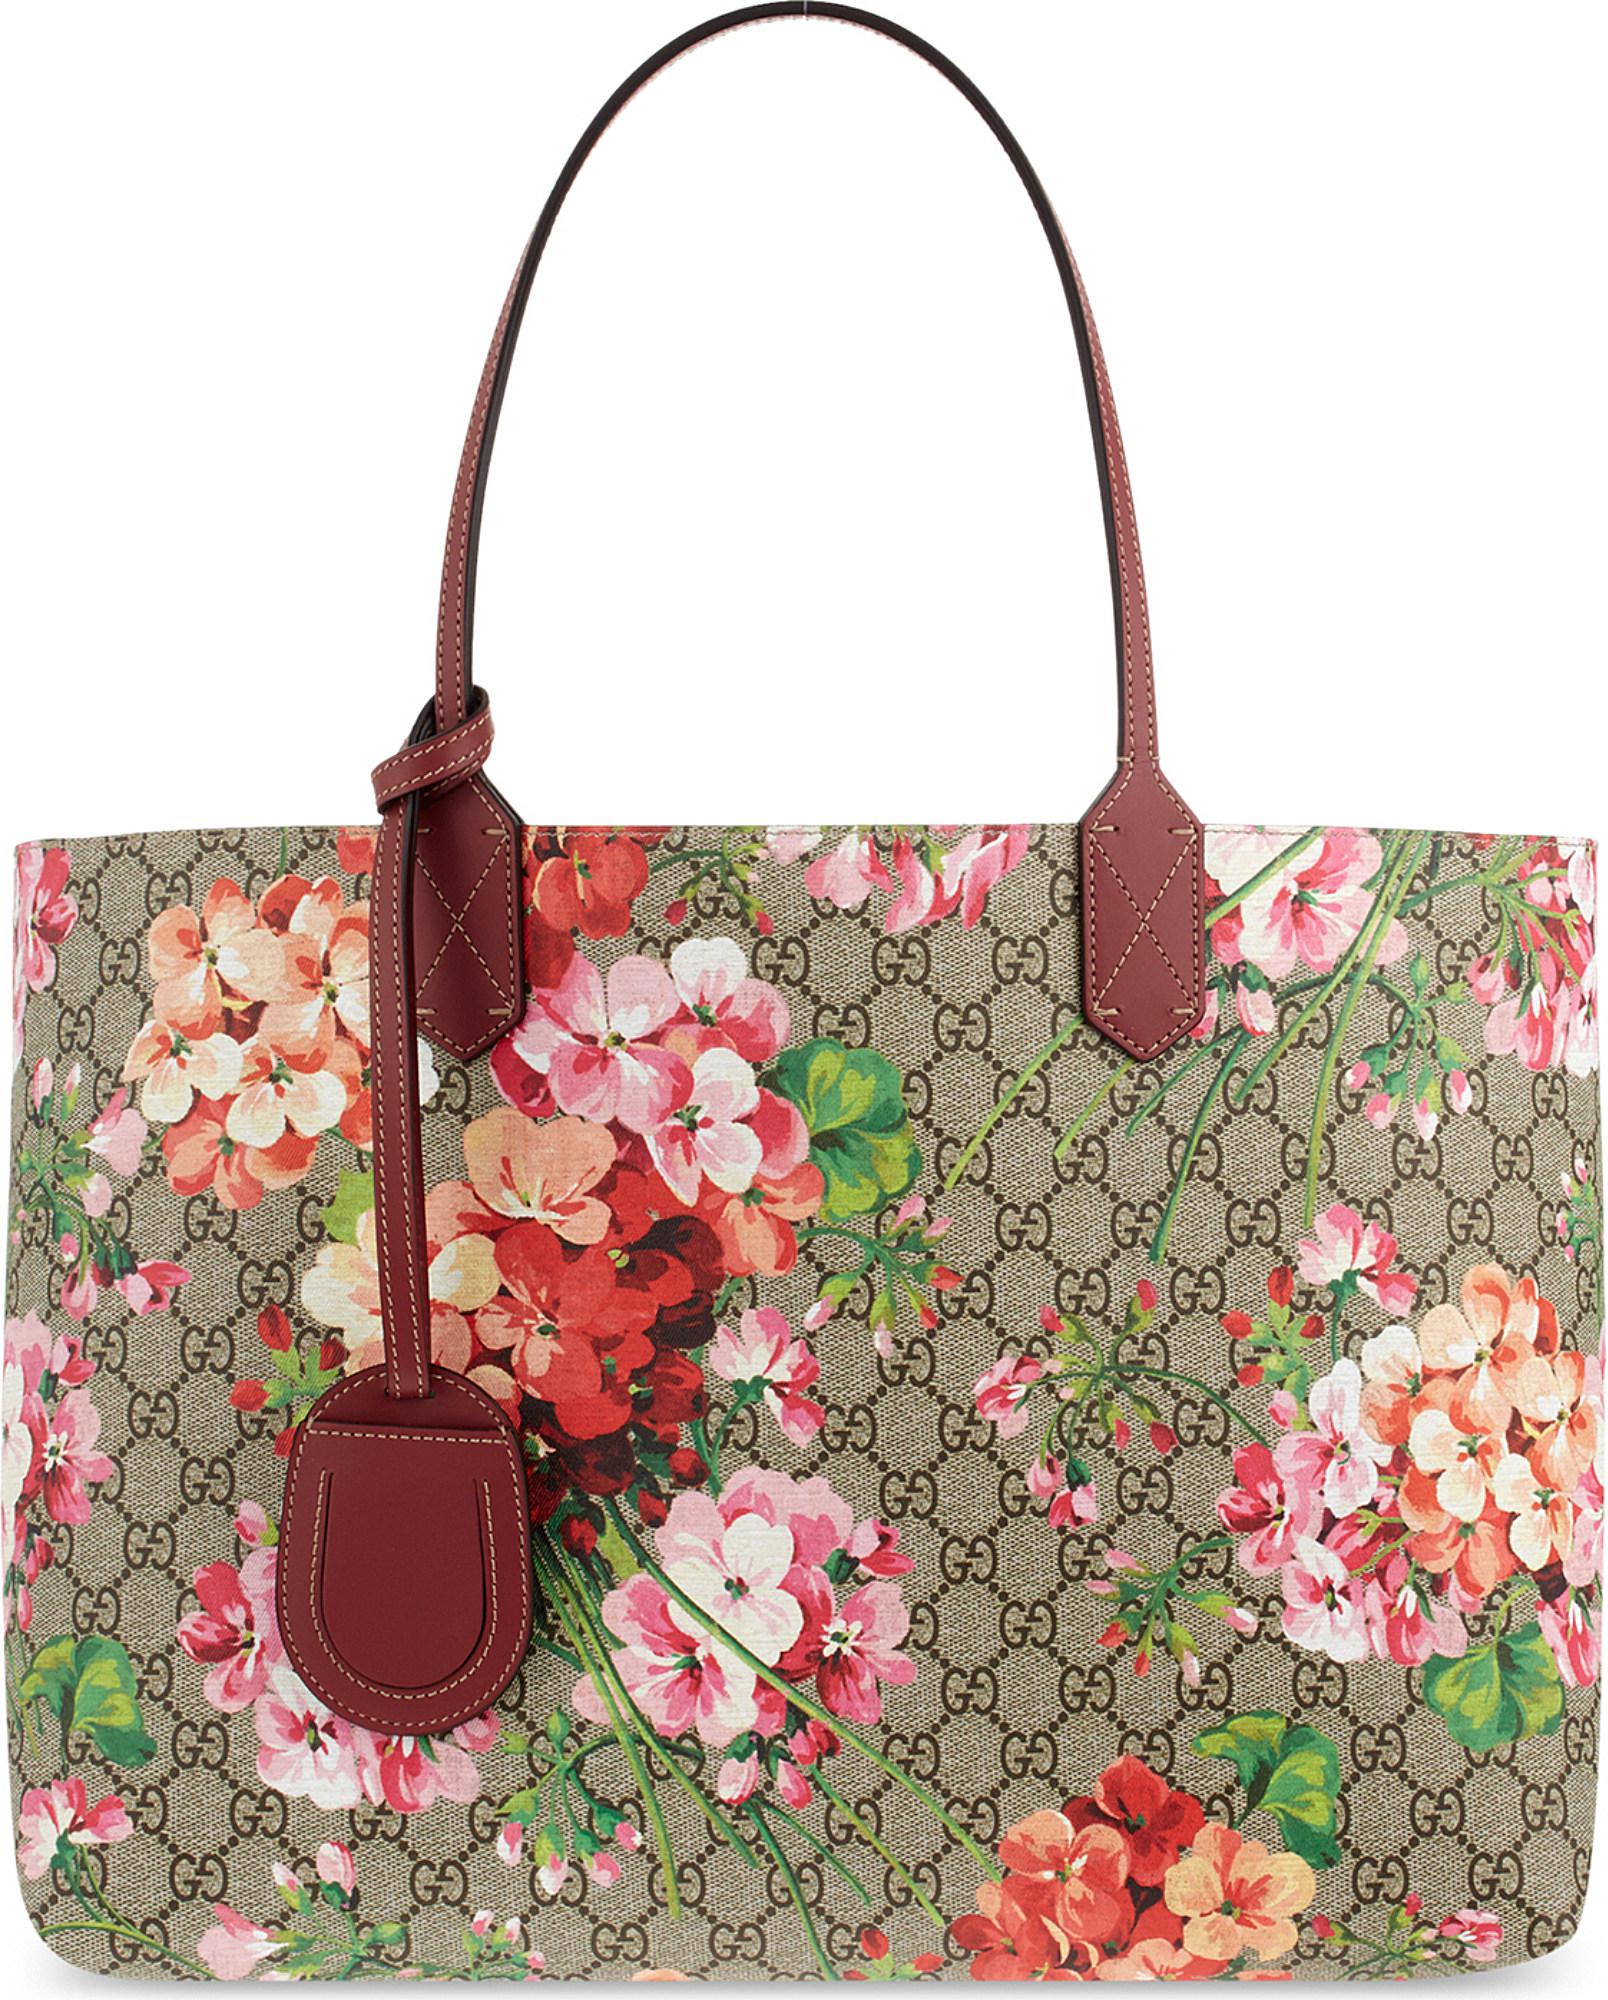 Gucci White Bag With Flowers